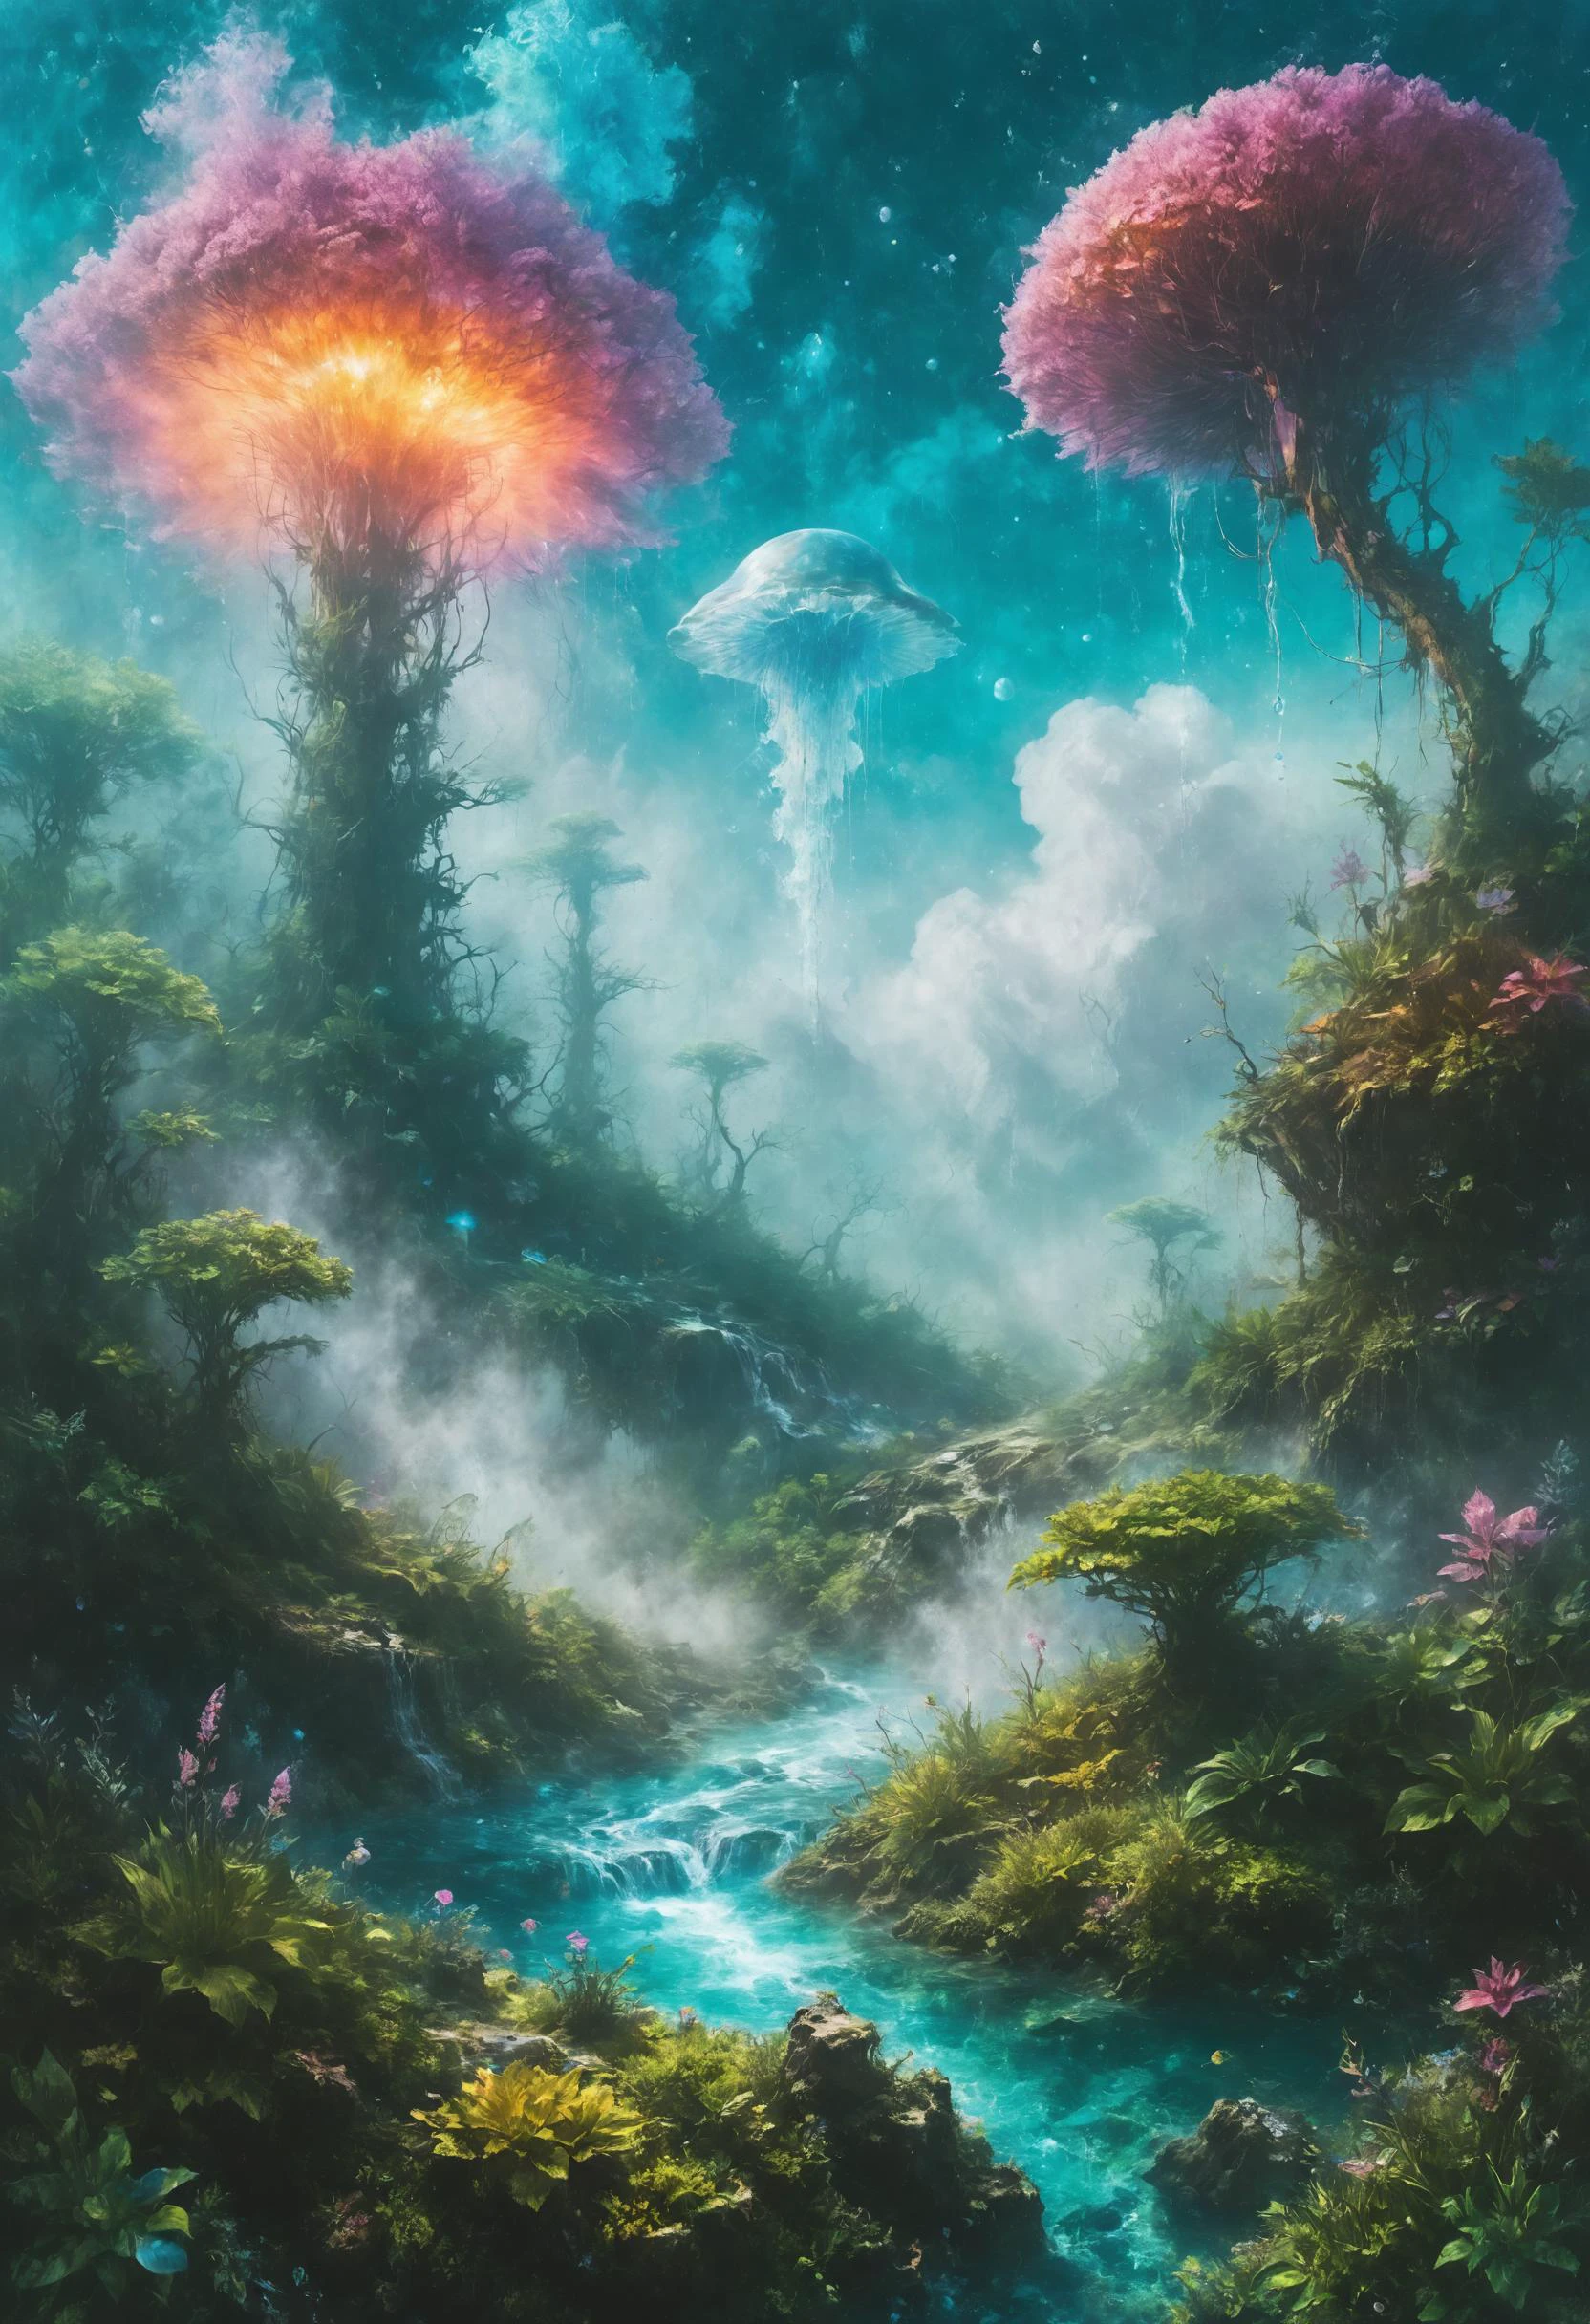 A shimmering field of underwater geysers, each releasing bursts of sparkling water and steam, creating a surreal and fantastical hot spring landscape, Galactic trader specializing in ancient relics in the foreground, saturated colors, 